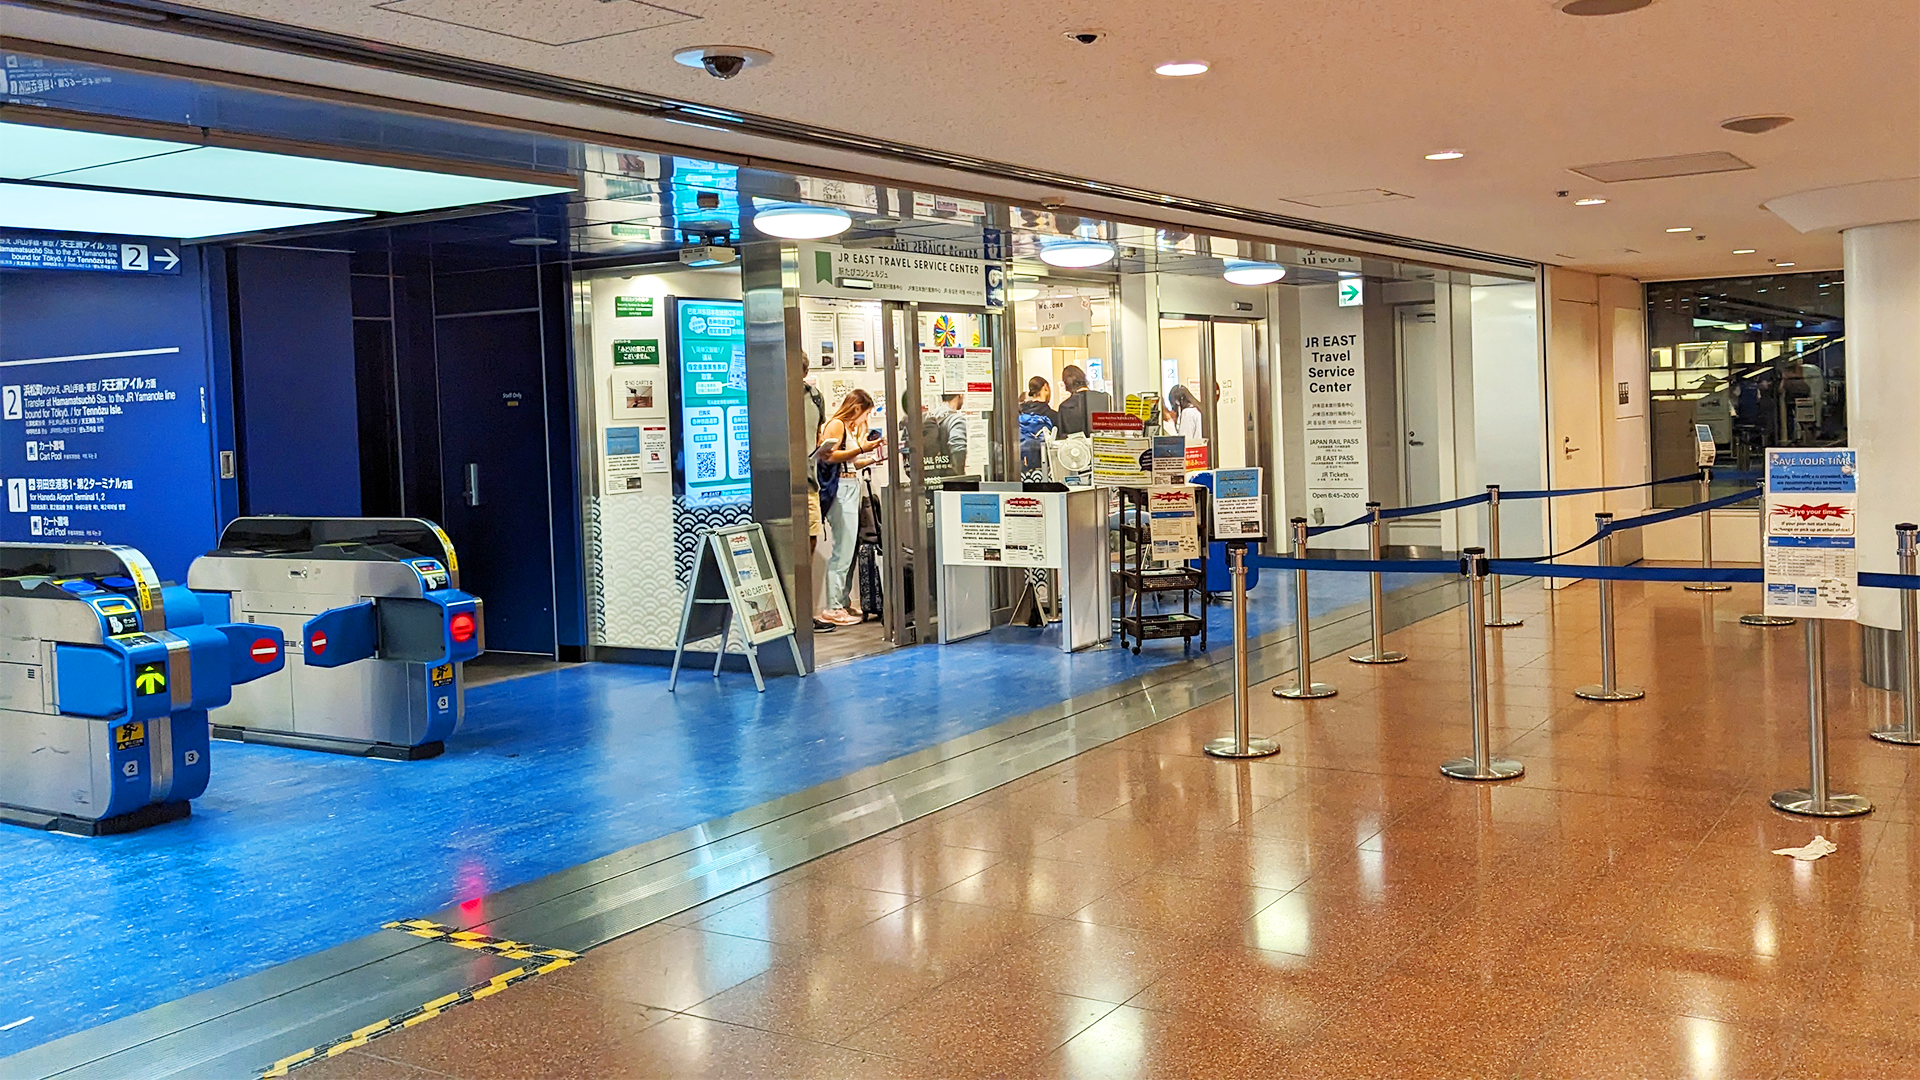 Tokyo Monorail Station (2F): JR East Travel Service Center at Haneda Airport Terminal 3